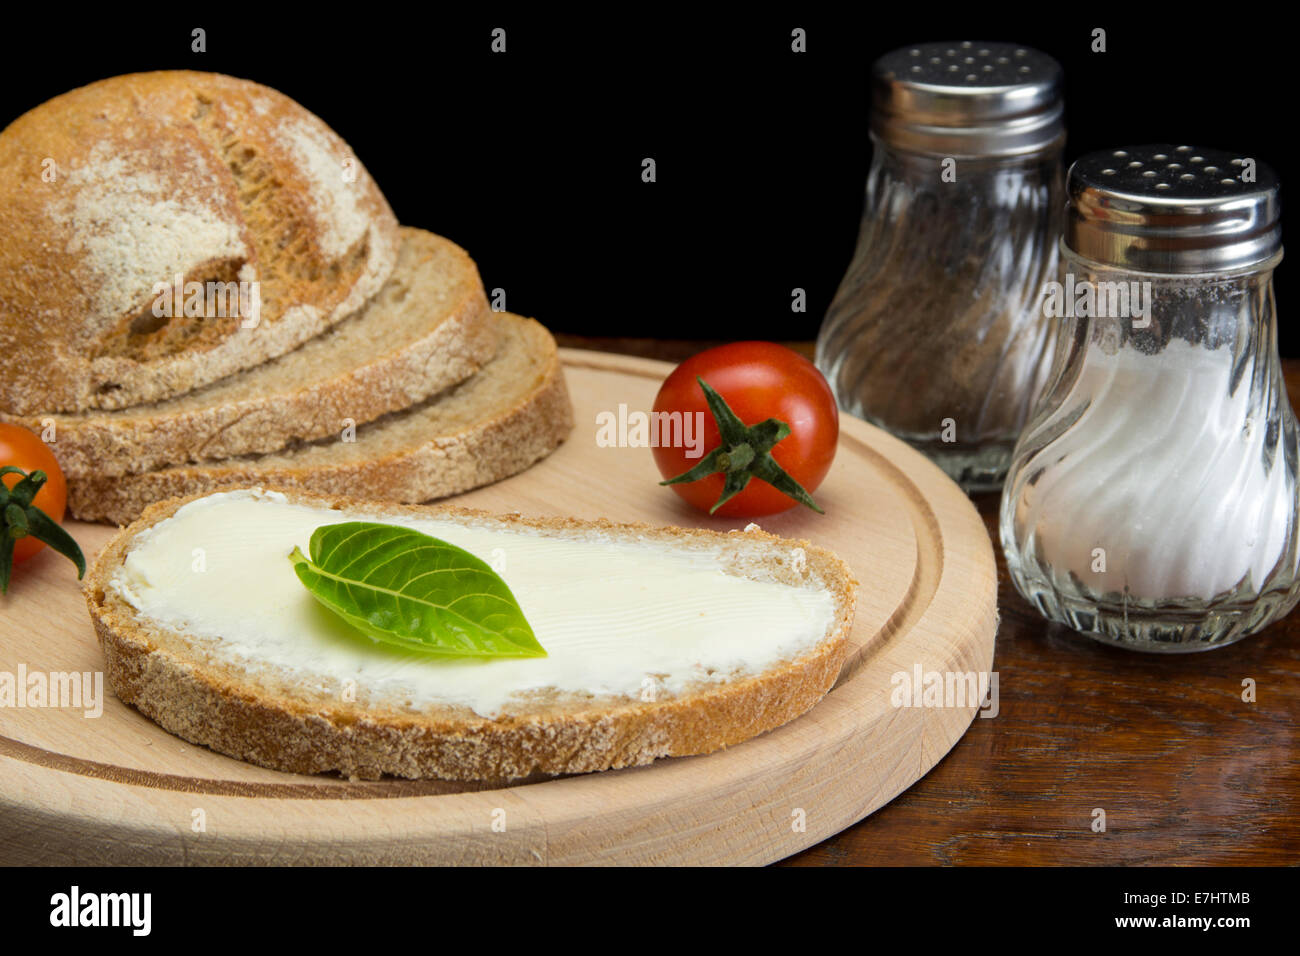 Close up image of spreading cream cheese on pumpernickel bread Stock Photo